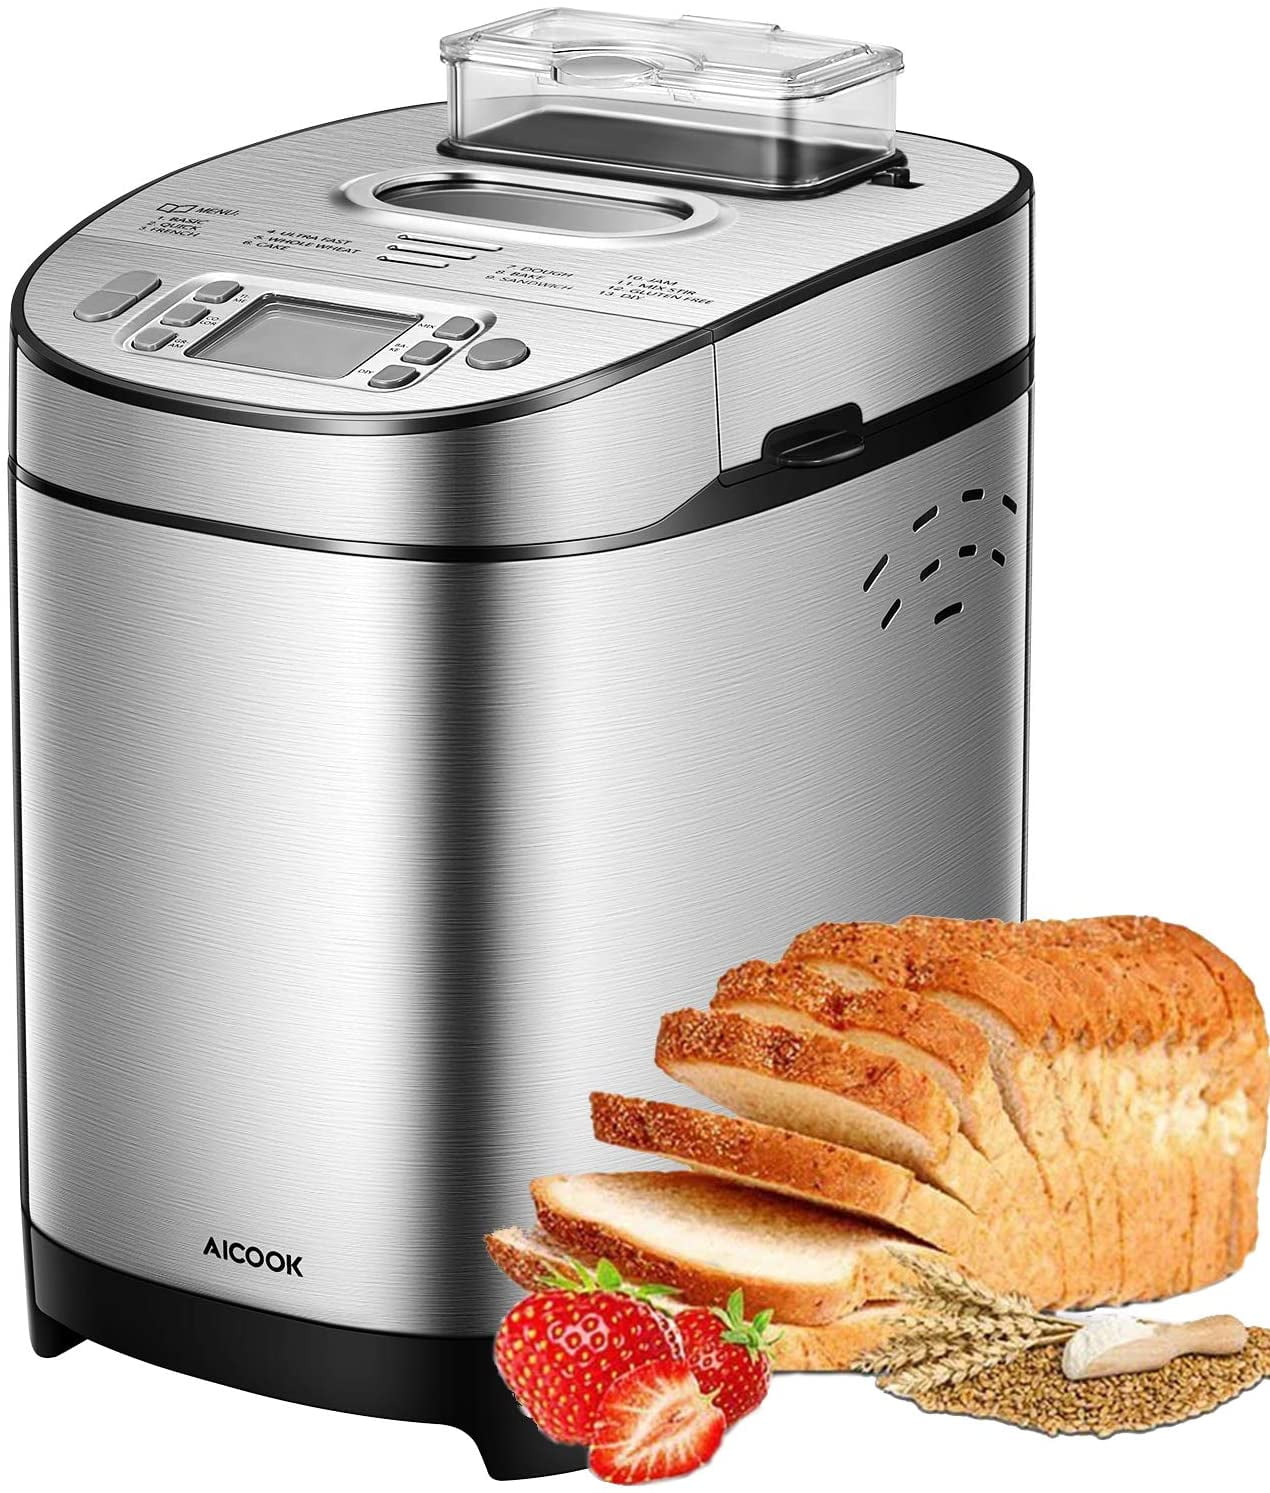 1 Hour Keep Warm Set 3 Crust Colors CROWNFUL Automatic Bread Machine ETL Listed 2LB Programmable Bread Maker with Nonstick Pan and 12 Presets Recipe Booklet Included 2 Loaf Sizes